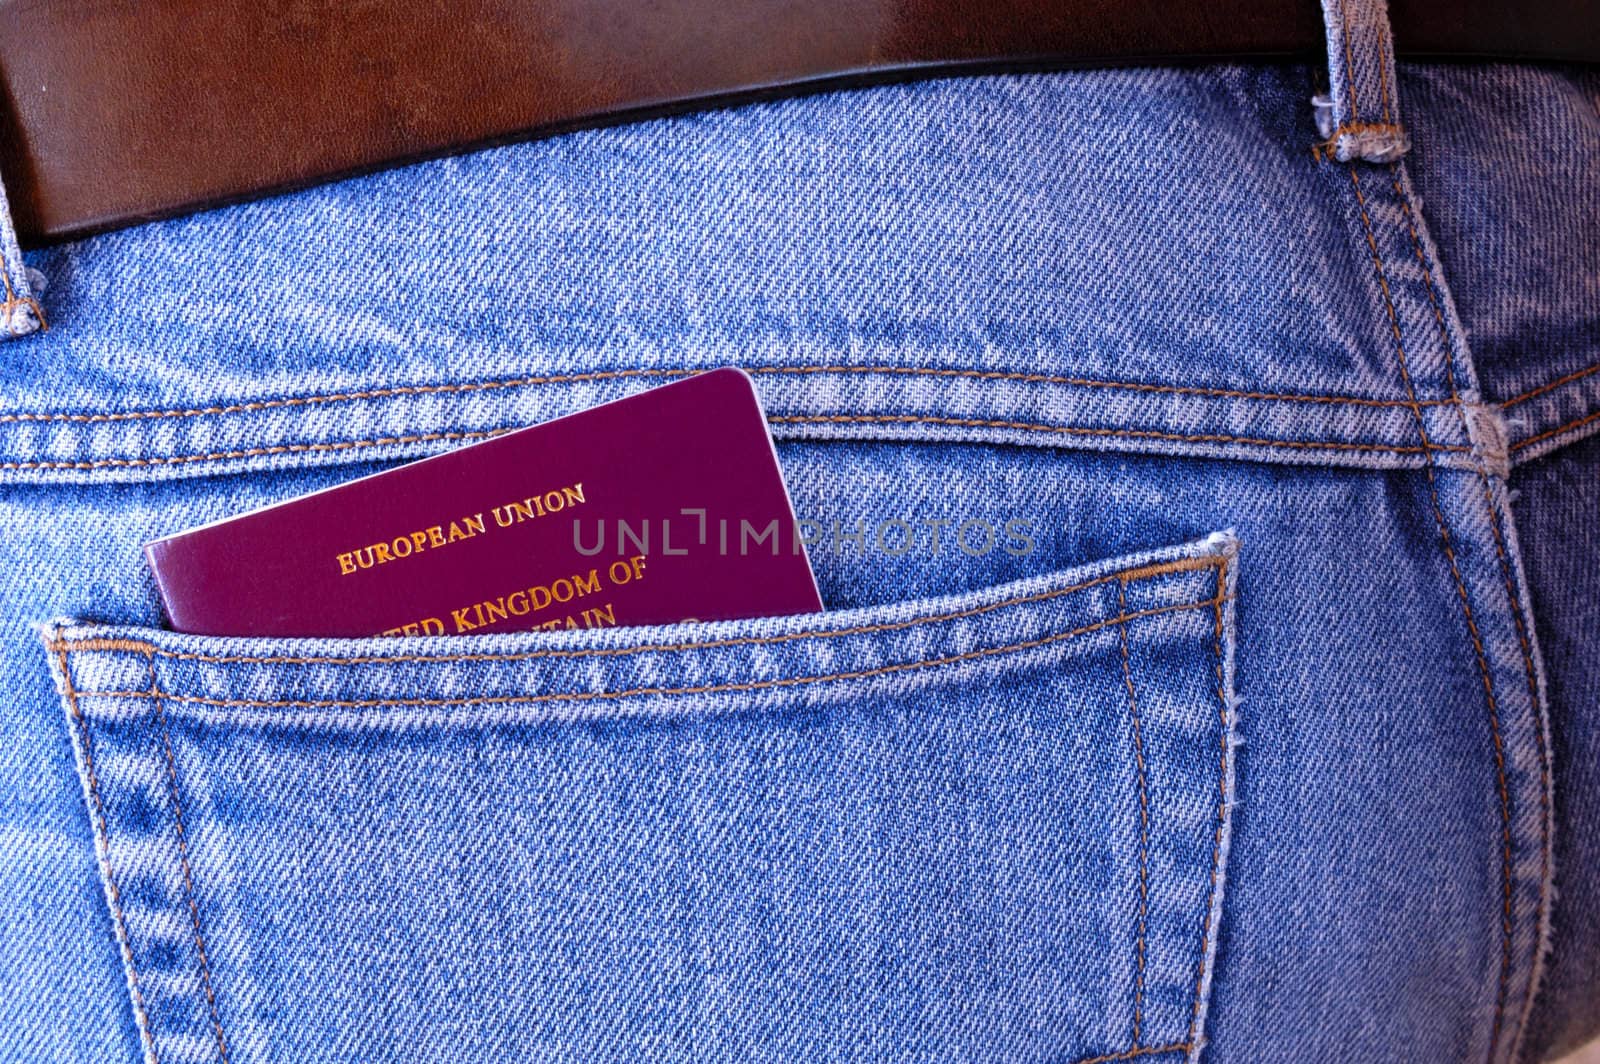 An EU/UK passport pokes out of the rear pocket of someone's jeans. A temptation for a pickpocket.